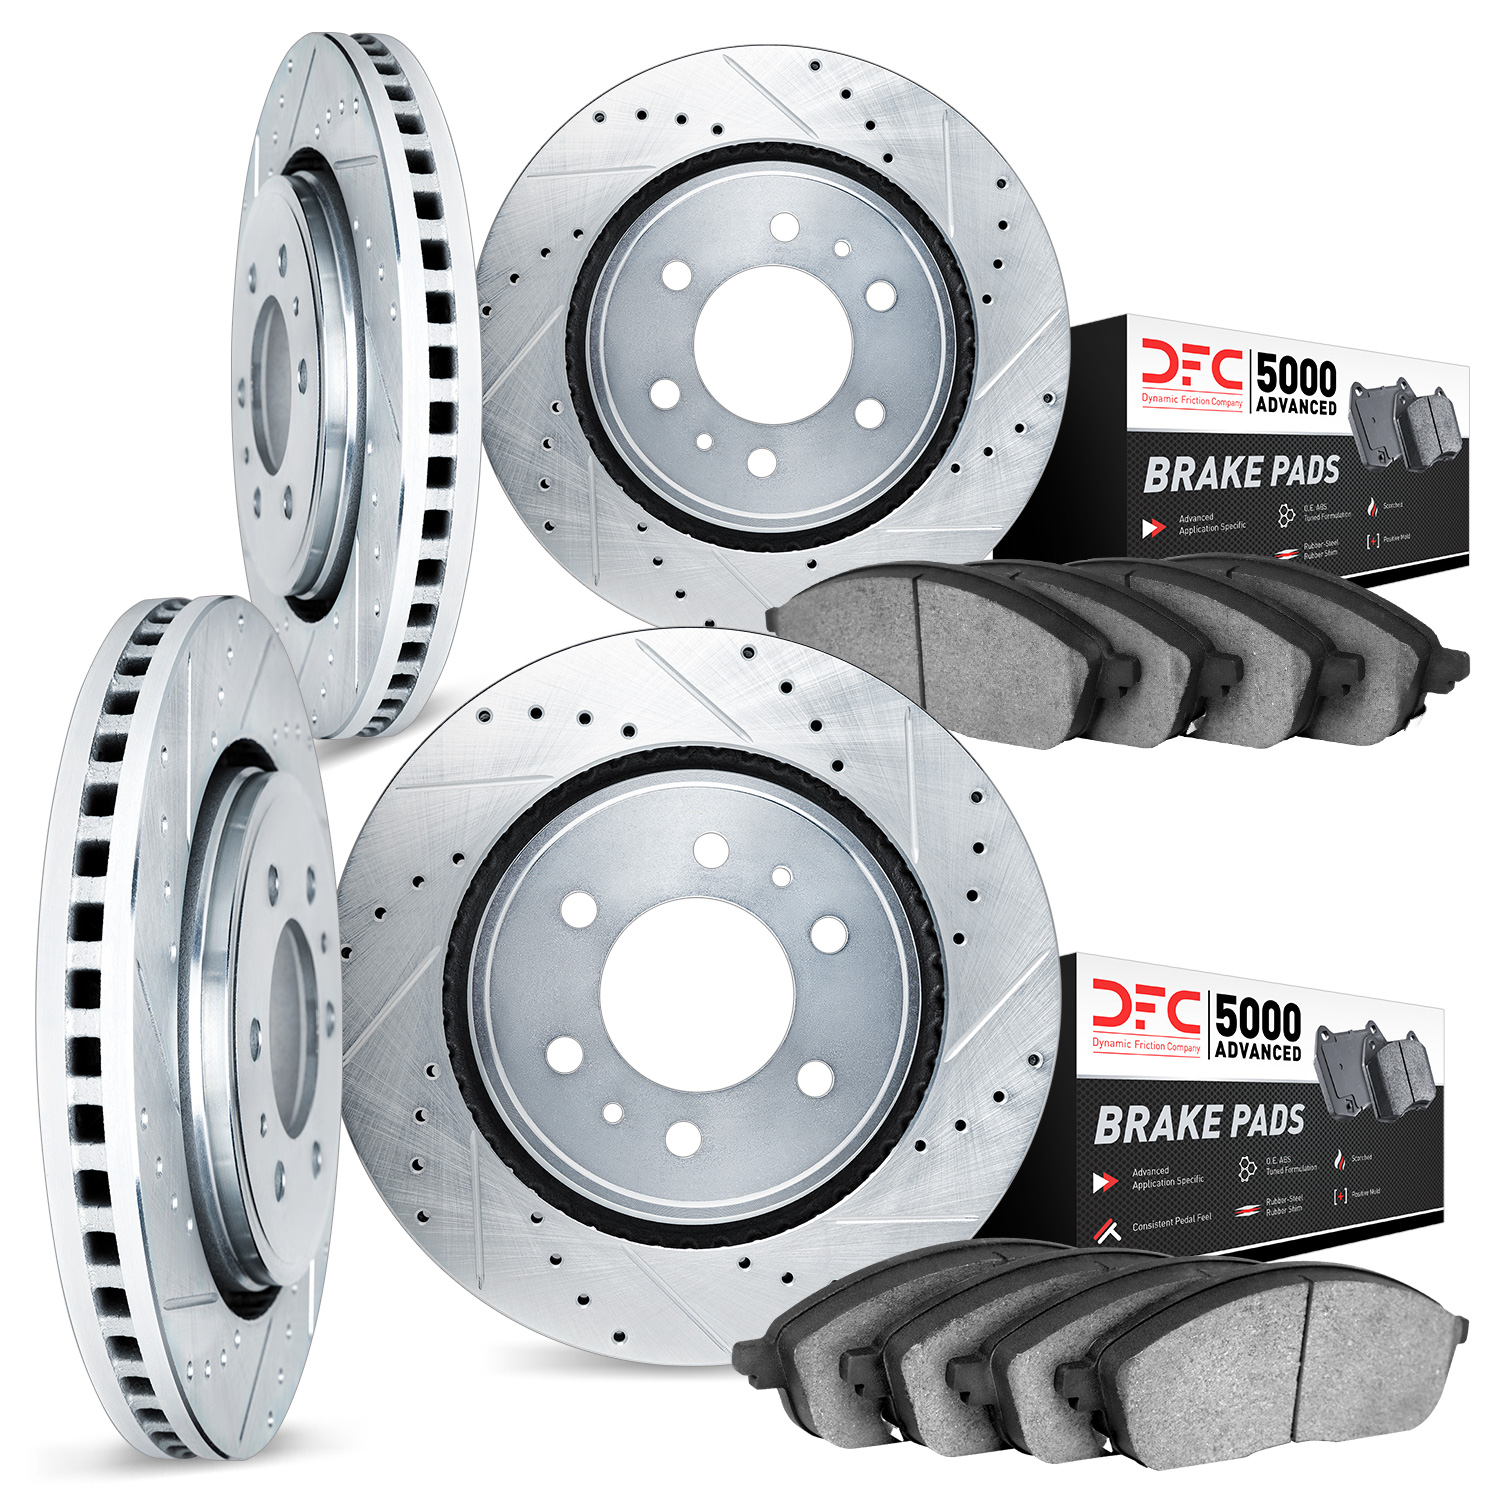 7504-48040 Drilled/Slotted Brake Rotors w/5000 Advanced Brake Pads Kit [Silver], 2007-2008 GM, Position: Front and Rear